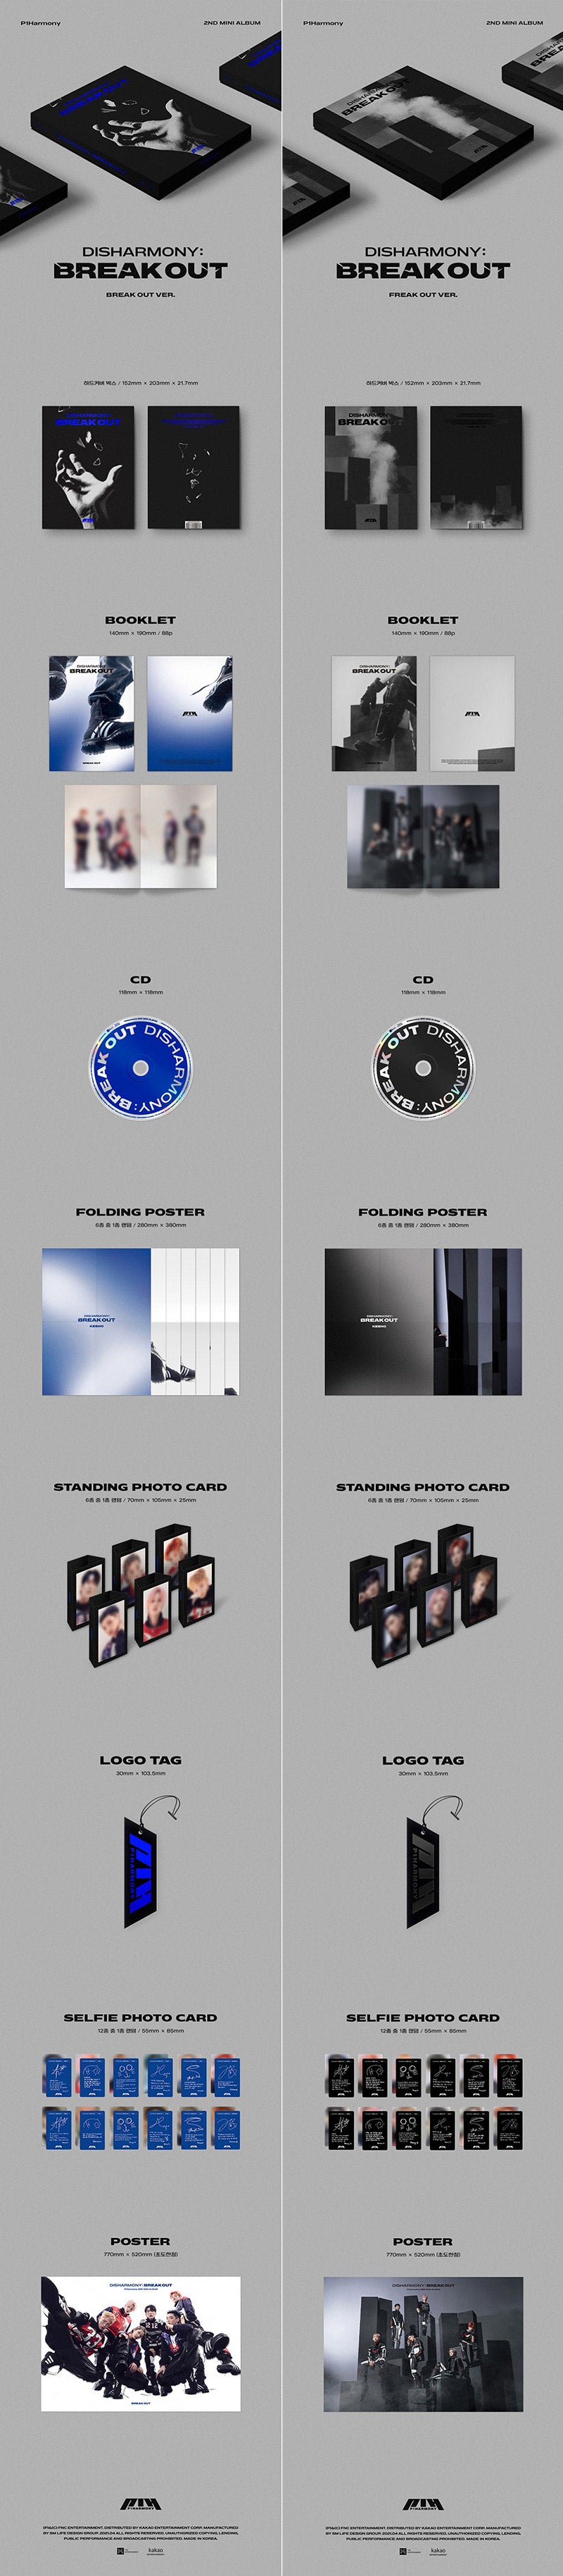 P1HARMONY DISHARMONY:BREAK OUT 2nd Mini Album [ BREAK OUT / FREAK OUT ]  RANDOM ver. CD+88p Photo Book+Folding Poster(On pack)+Standing Photo  Card+etc